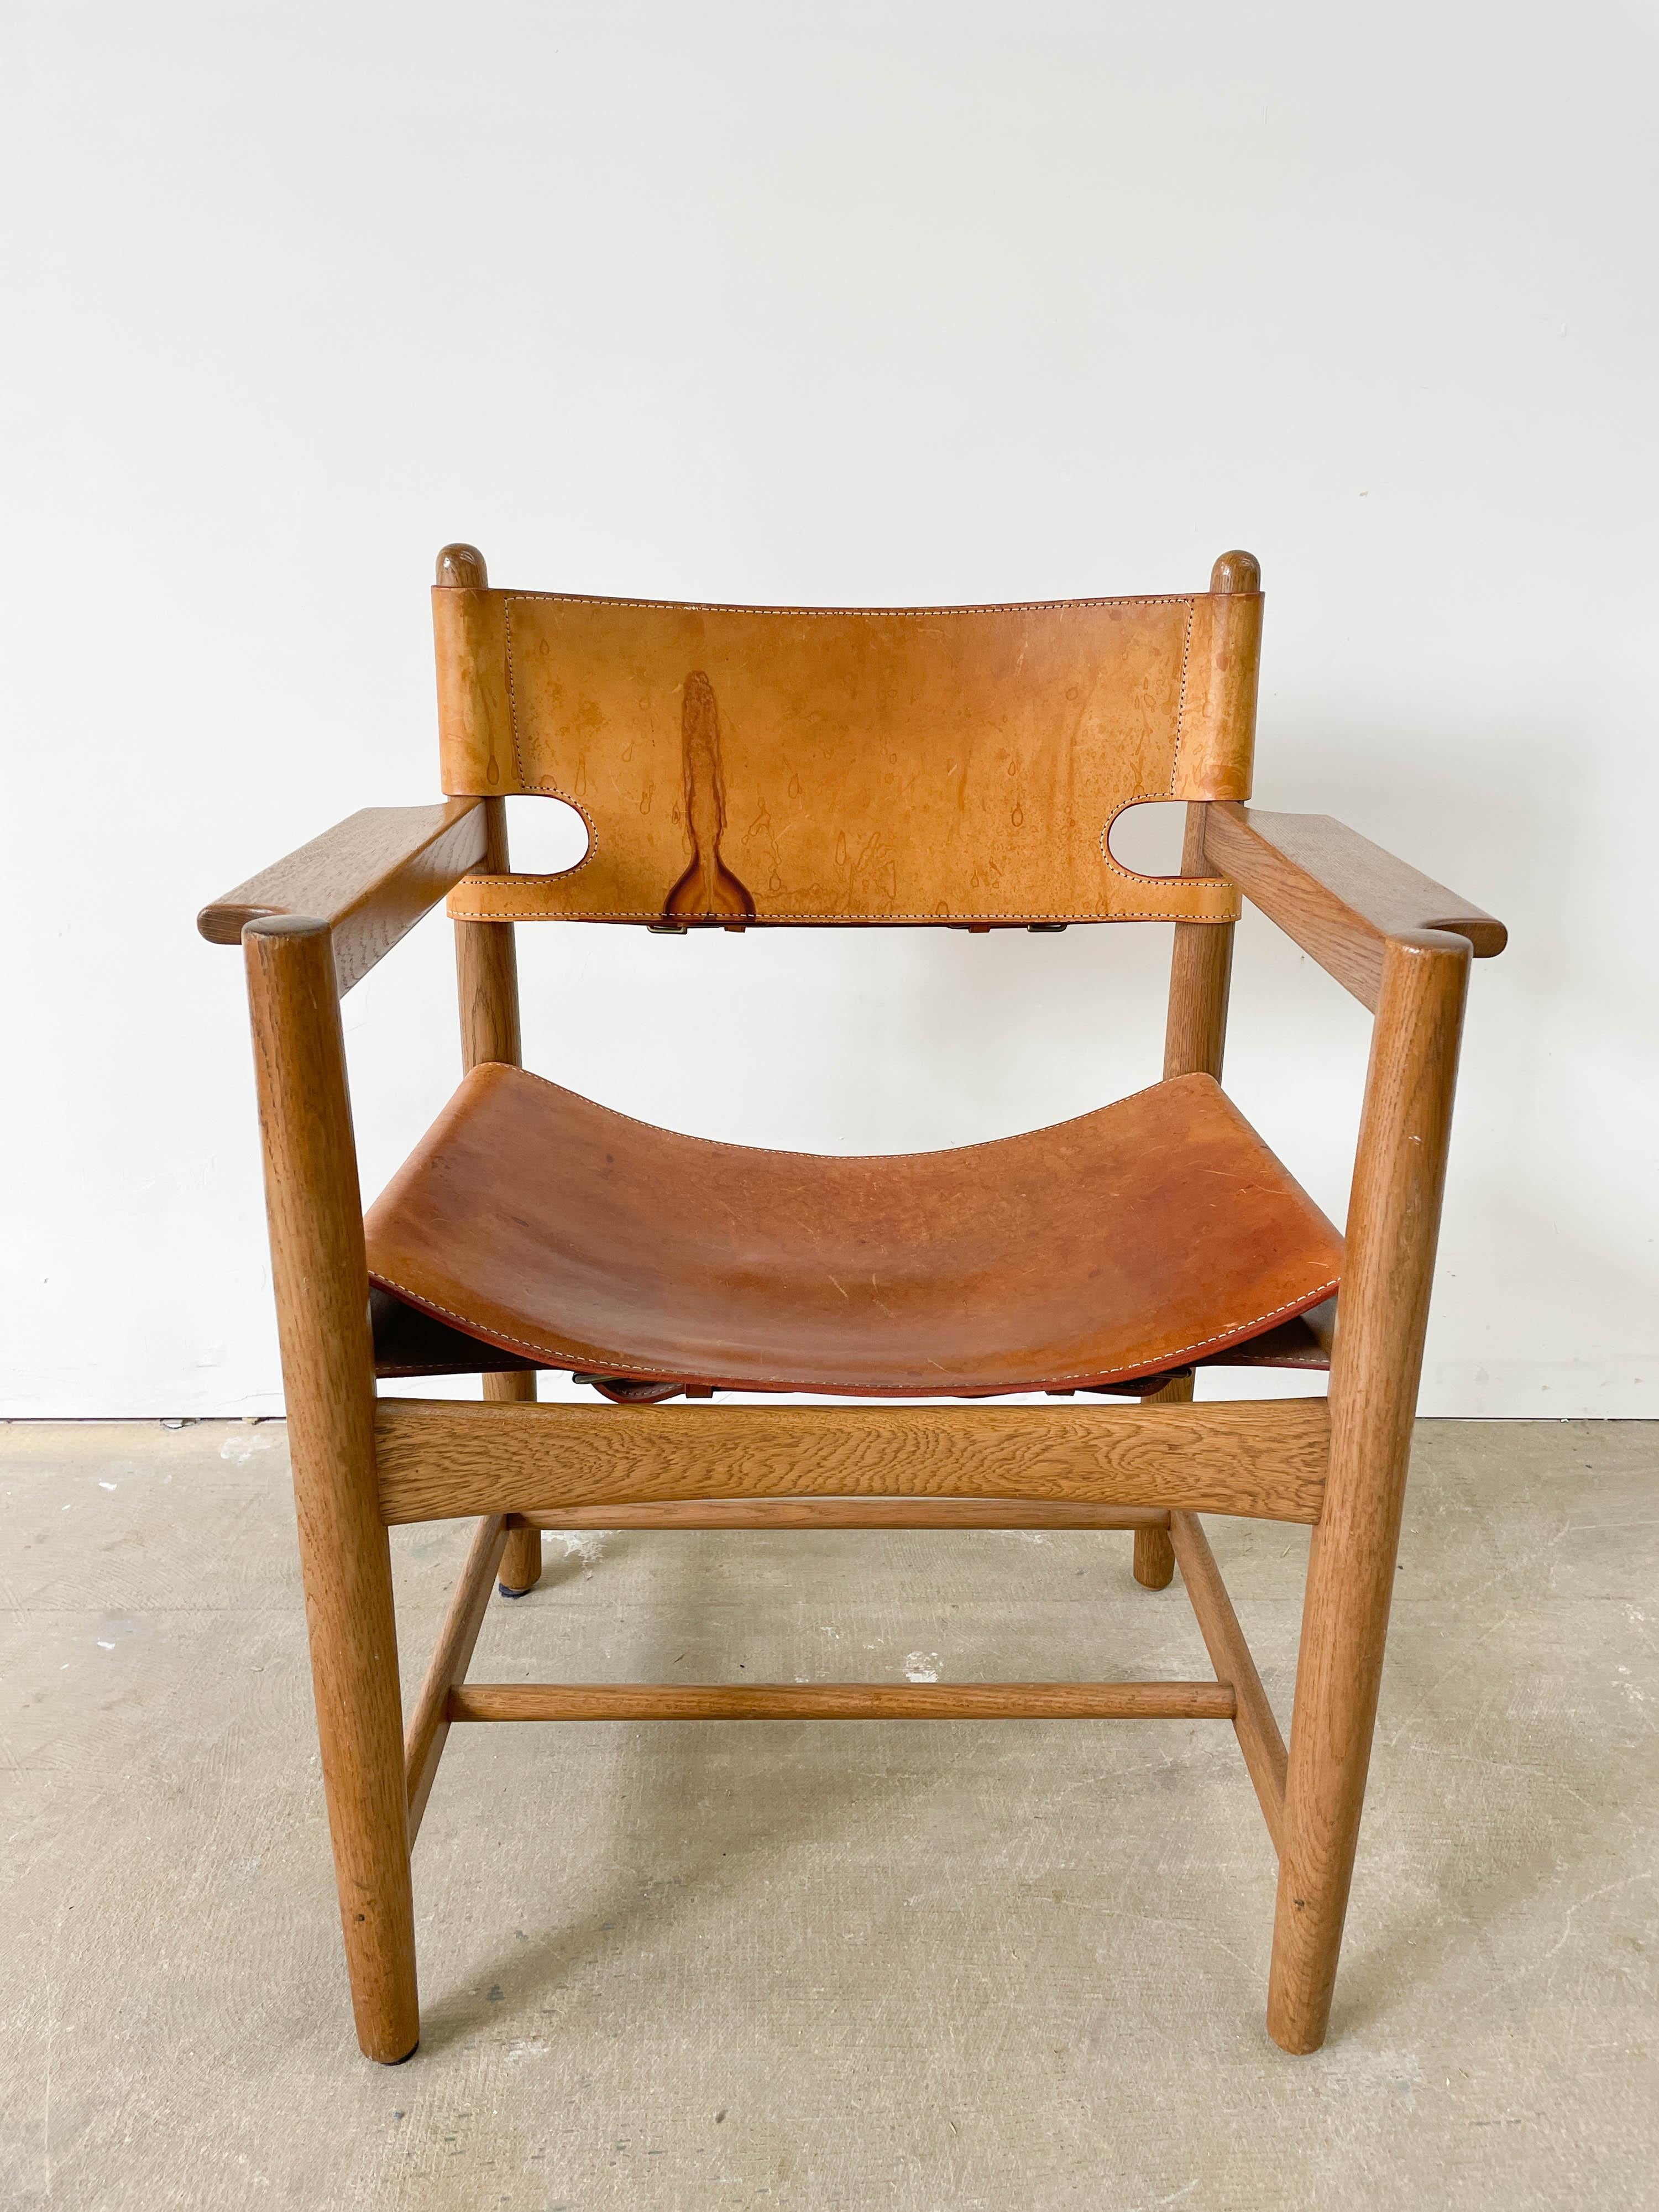 Wonderfully patinated Oak and Leather armchair by Borge Mogensen for Frederica in the 1960s. Mogensen's signature restrained and honest frame design combines with thick leather slings and stylish buckles. Chair is very solid and leather holds the